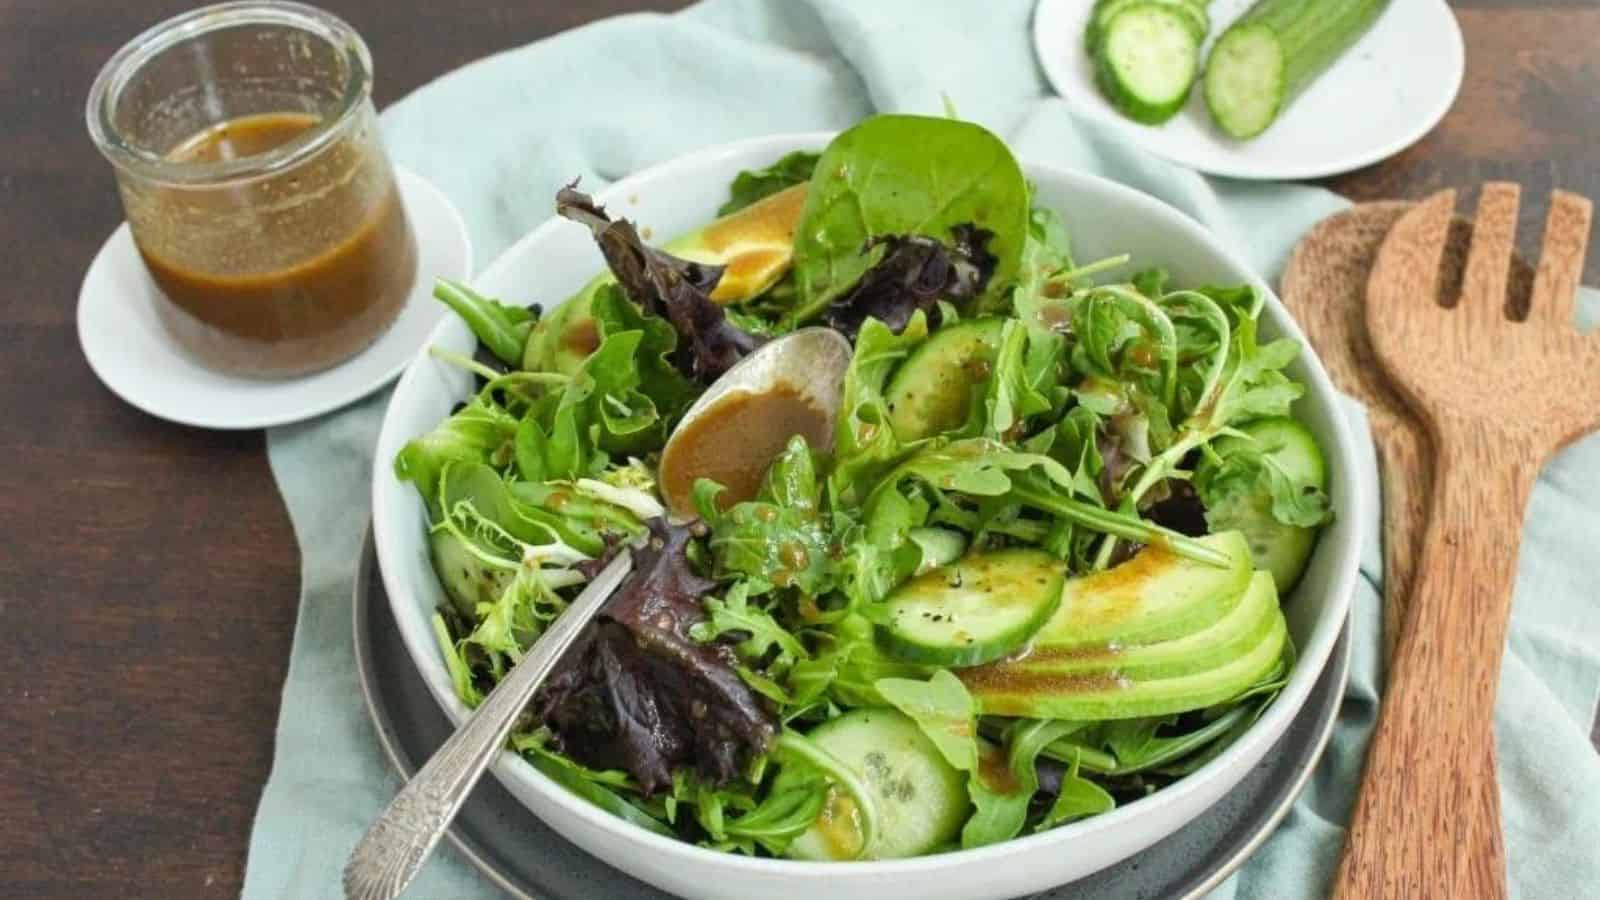 A green salad tossed with balsamic dressing in a white bowl with a jar of salad dressing beside it.